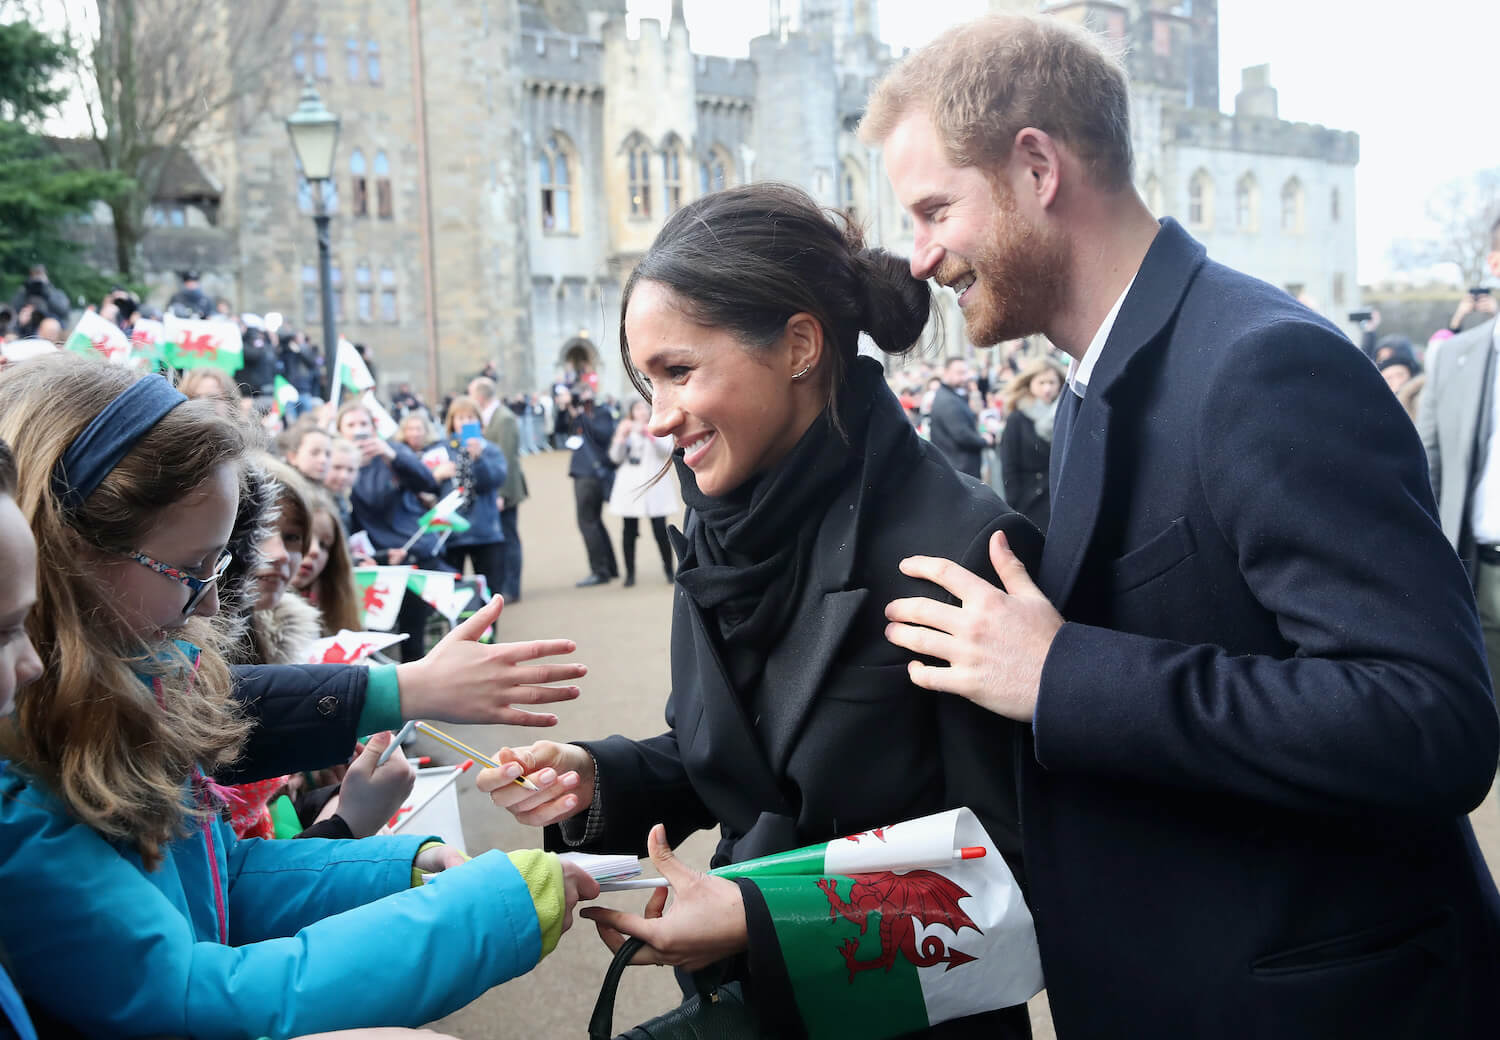 Prince Harry Treated Meghan Markle ‘Like a Puppet’ During 2018 Appearance, Body Language Expert Says